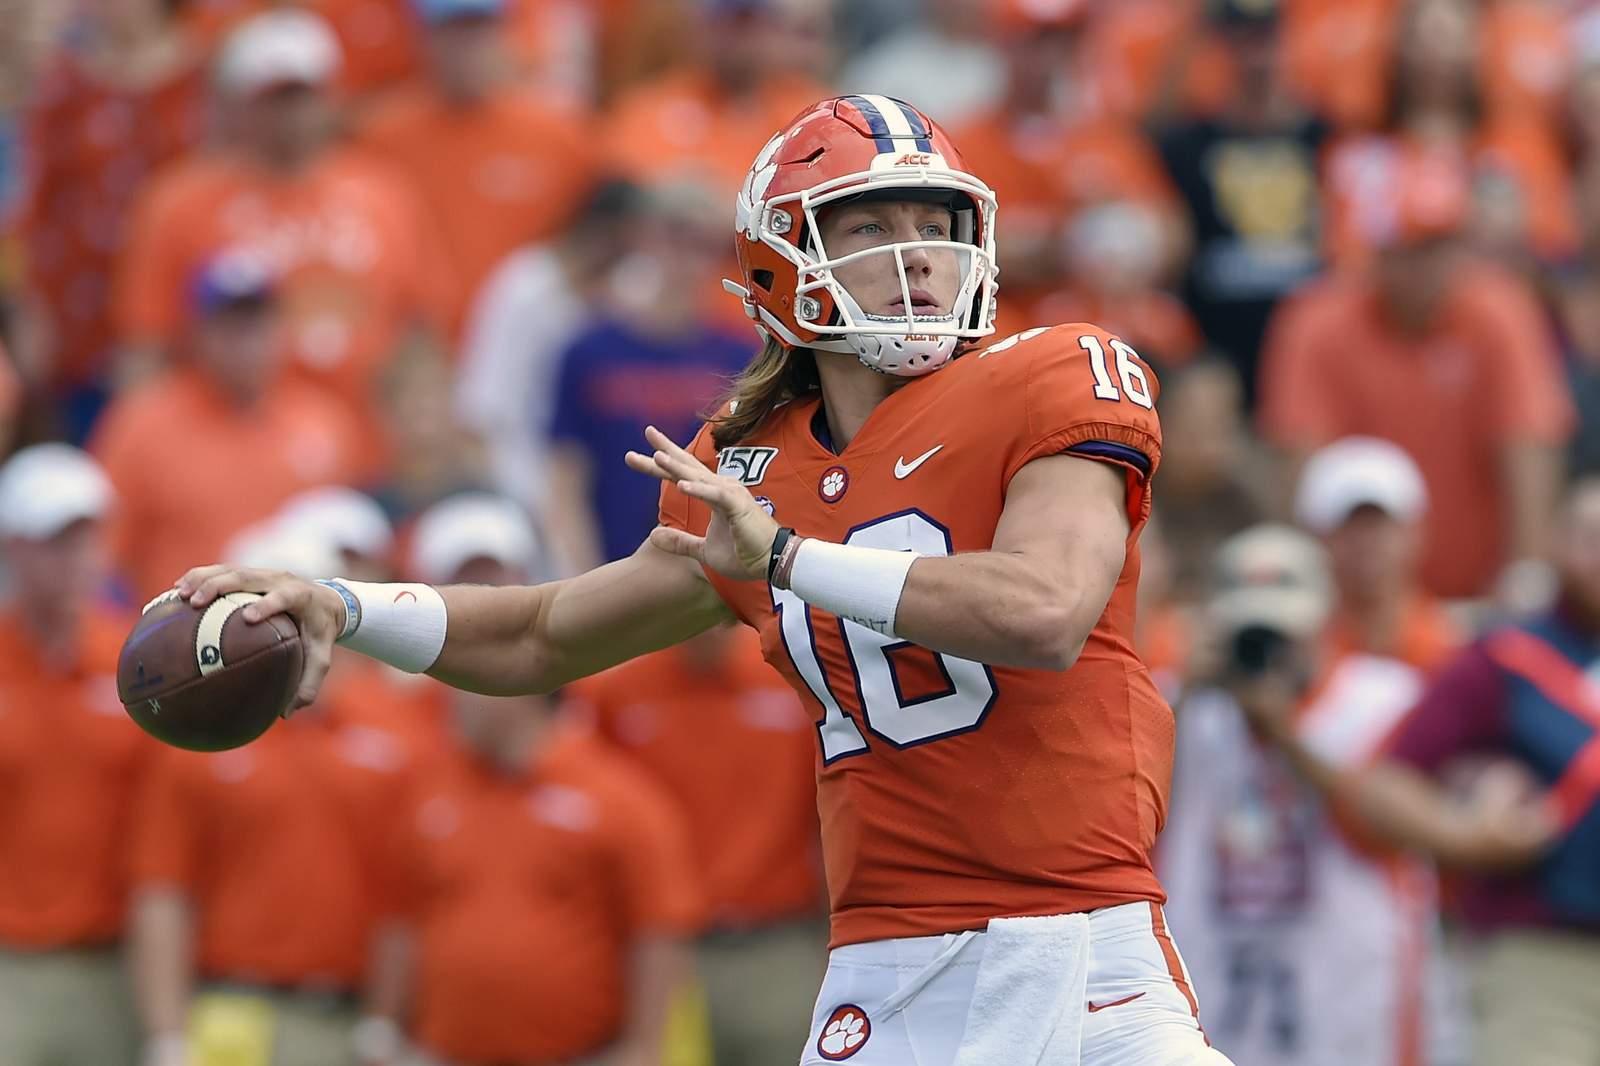 Week 2 Preview: Trevor Lawrence launches Heisman campaign